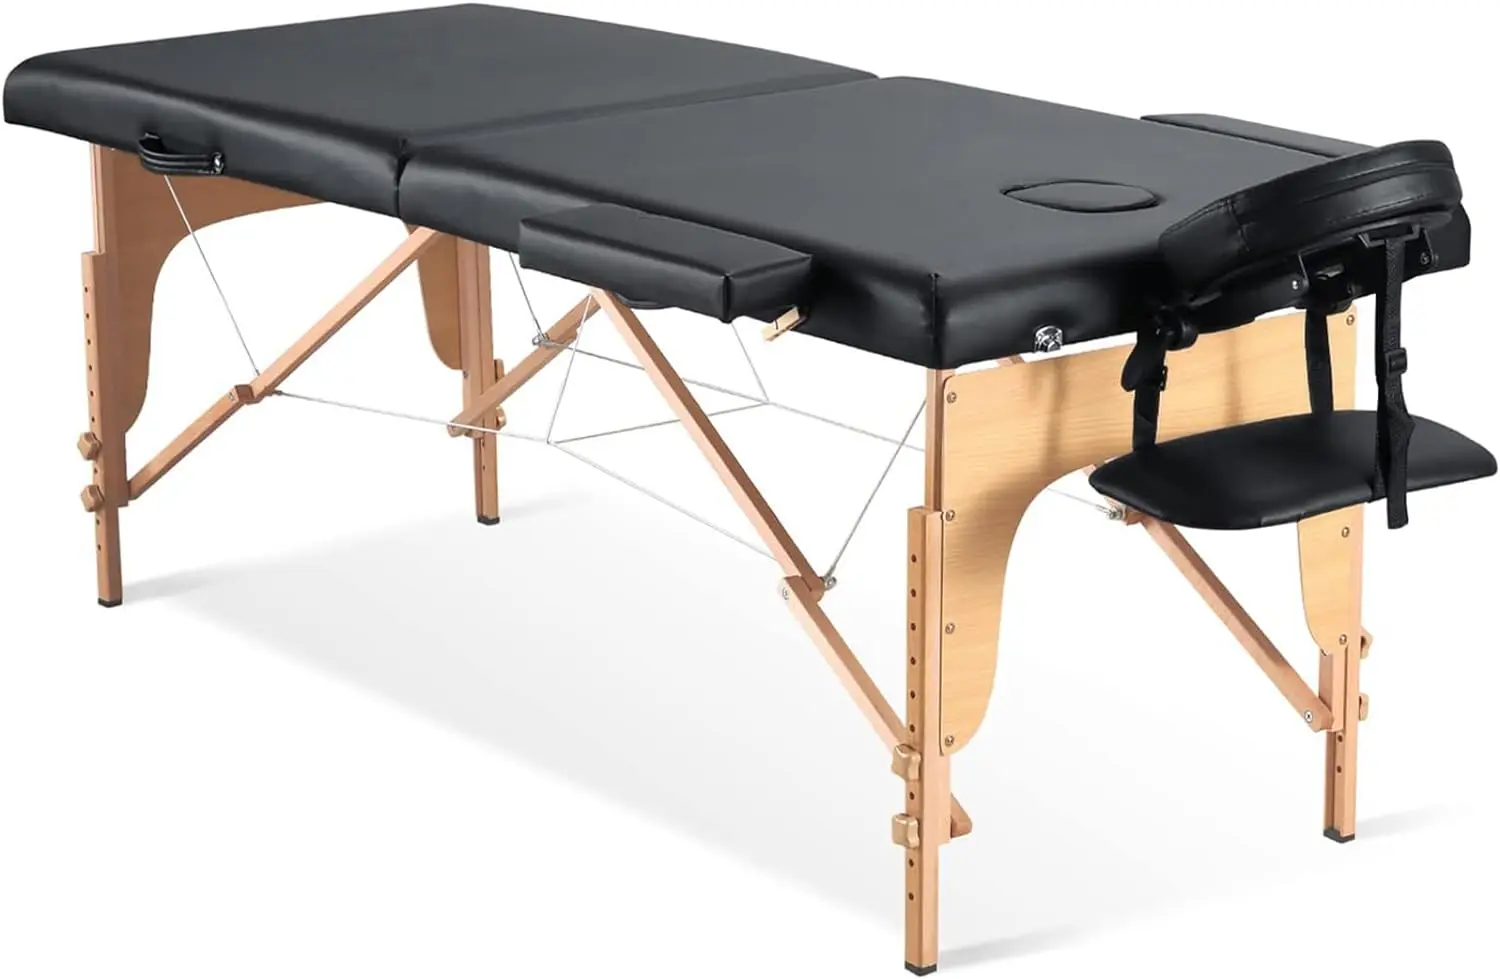 

Portable Massage Table Professional Massage Wide 35 Height Adjustment Lash Bed SPA Bed Facial Tattoo Table with Accessor